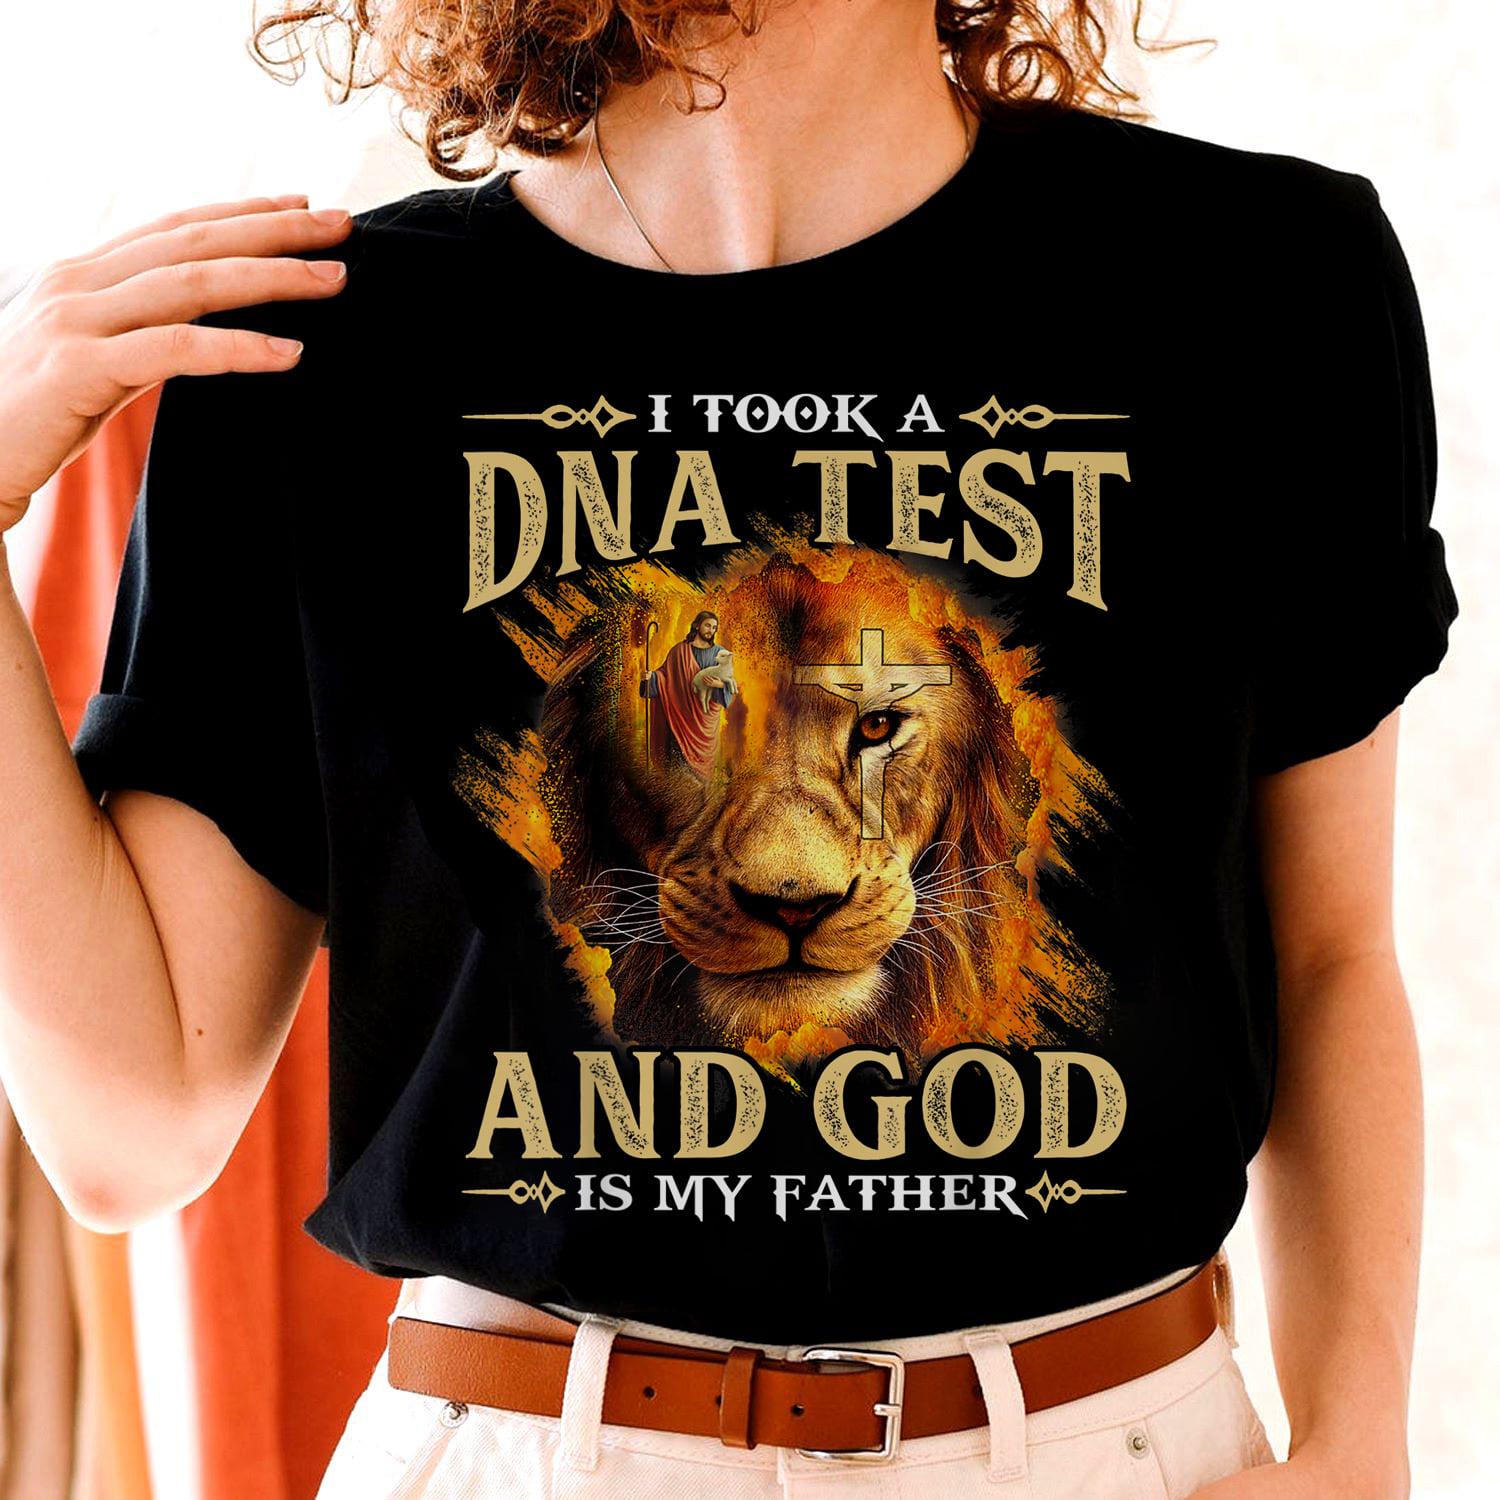 I took a DNA test and God is my father - Jesus and Lion, Believe in Jesus, gift for Christian